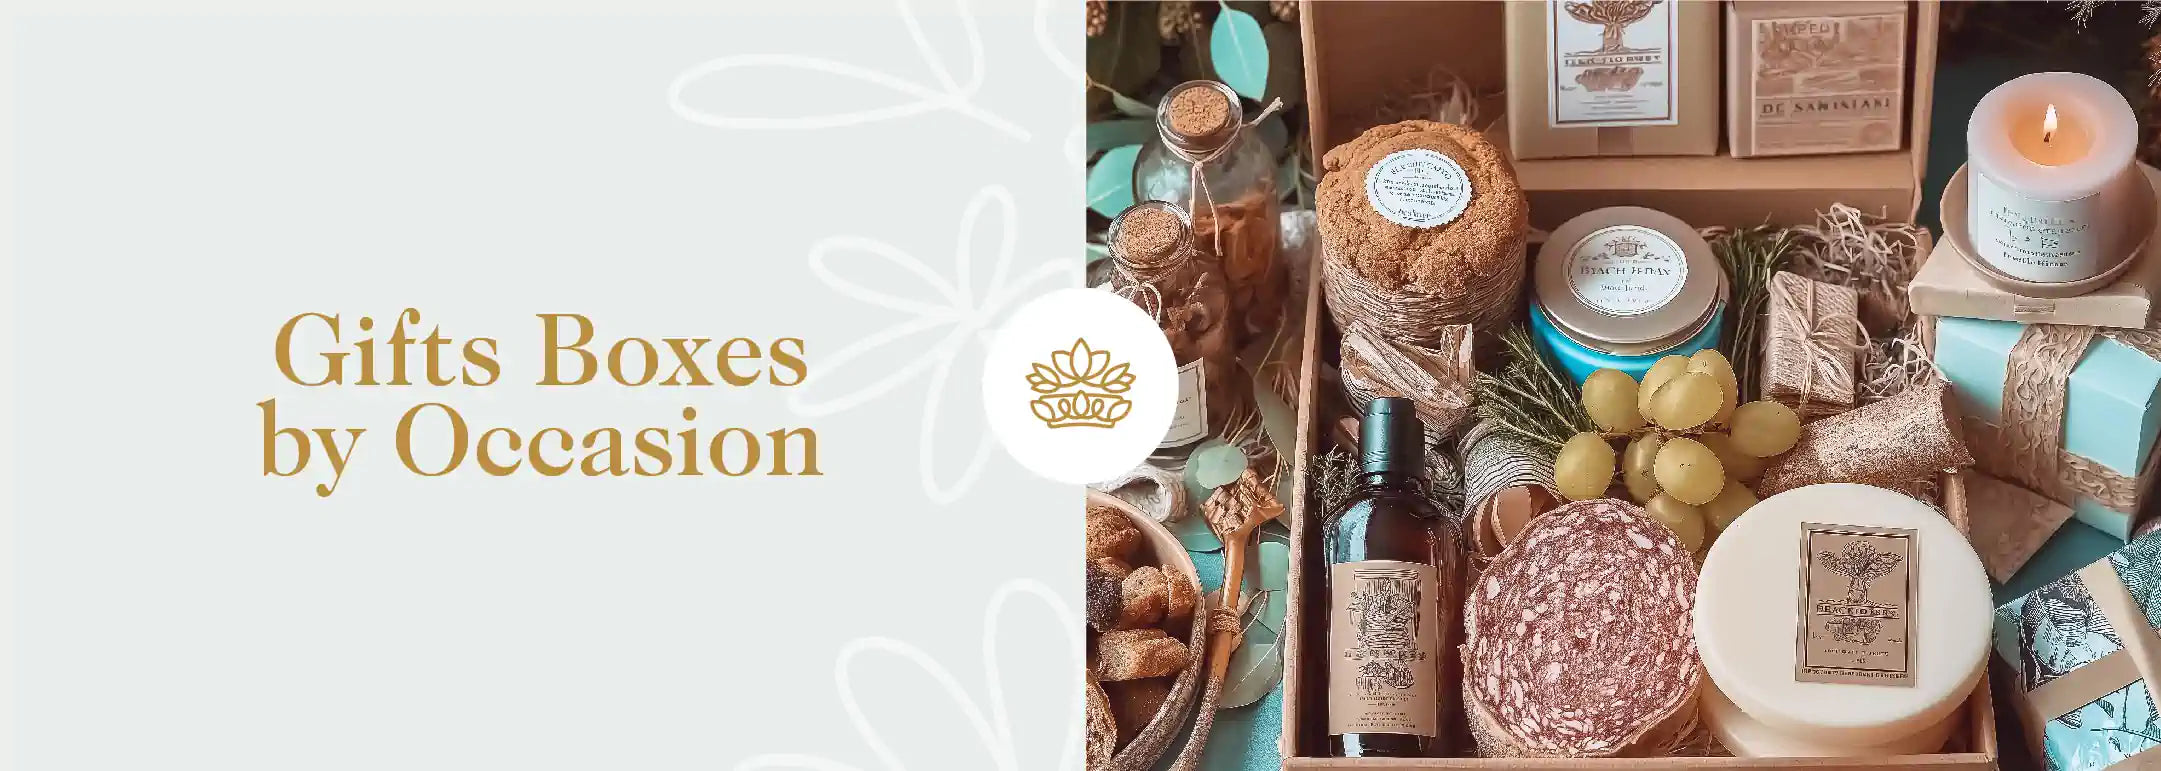 Elegant display of the Gift Boxes by Occasion Collection, featuring an assortment of beautifully curated items including candles, gourmet foods, and artisanal products, perfect for special events. Fabulous Flowers and Gifts.